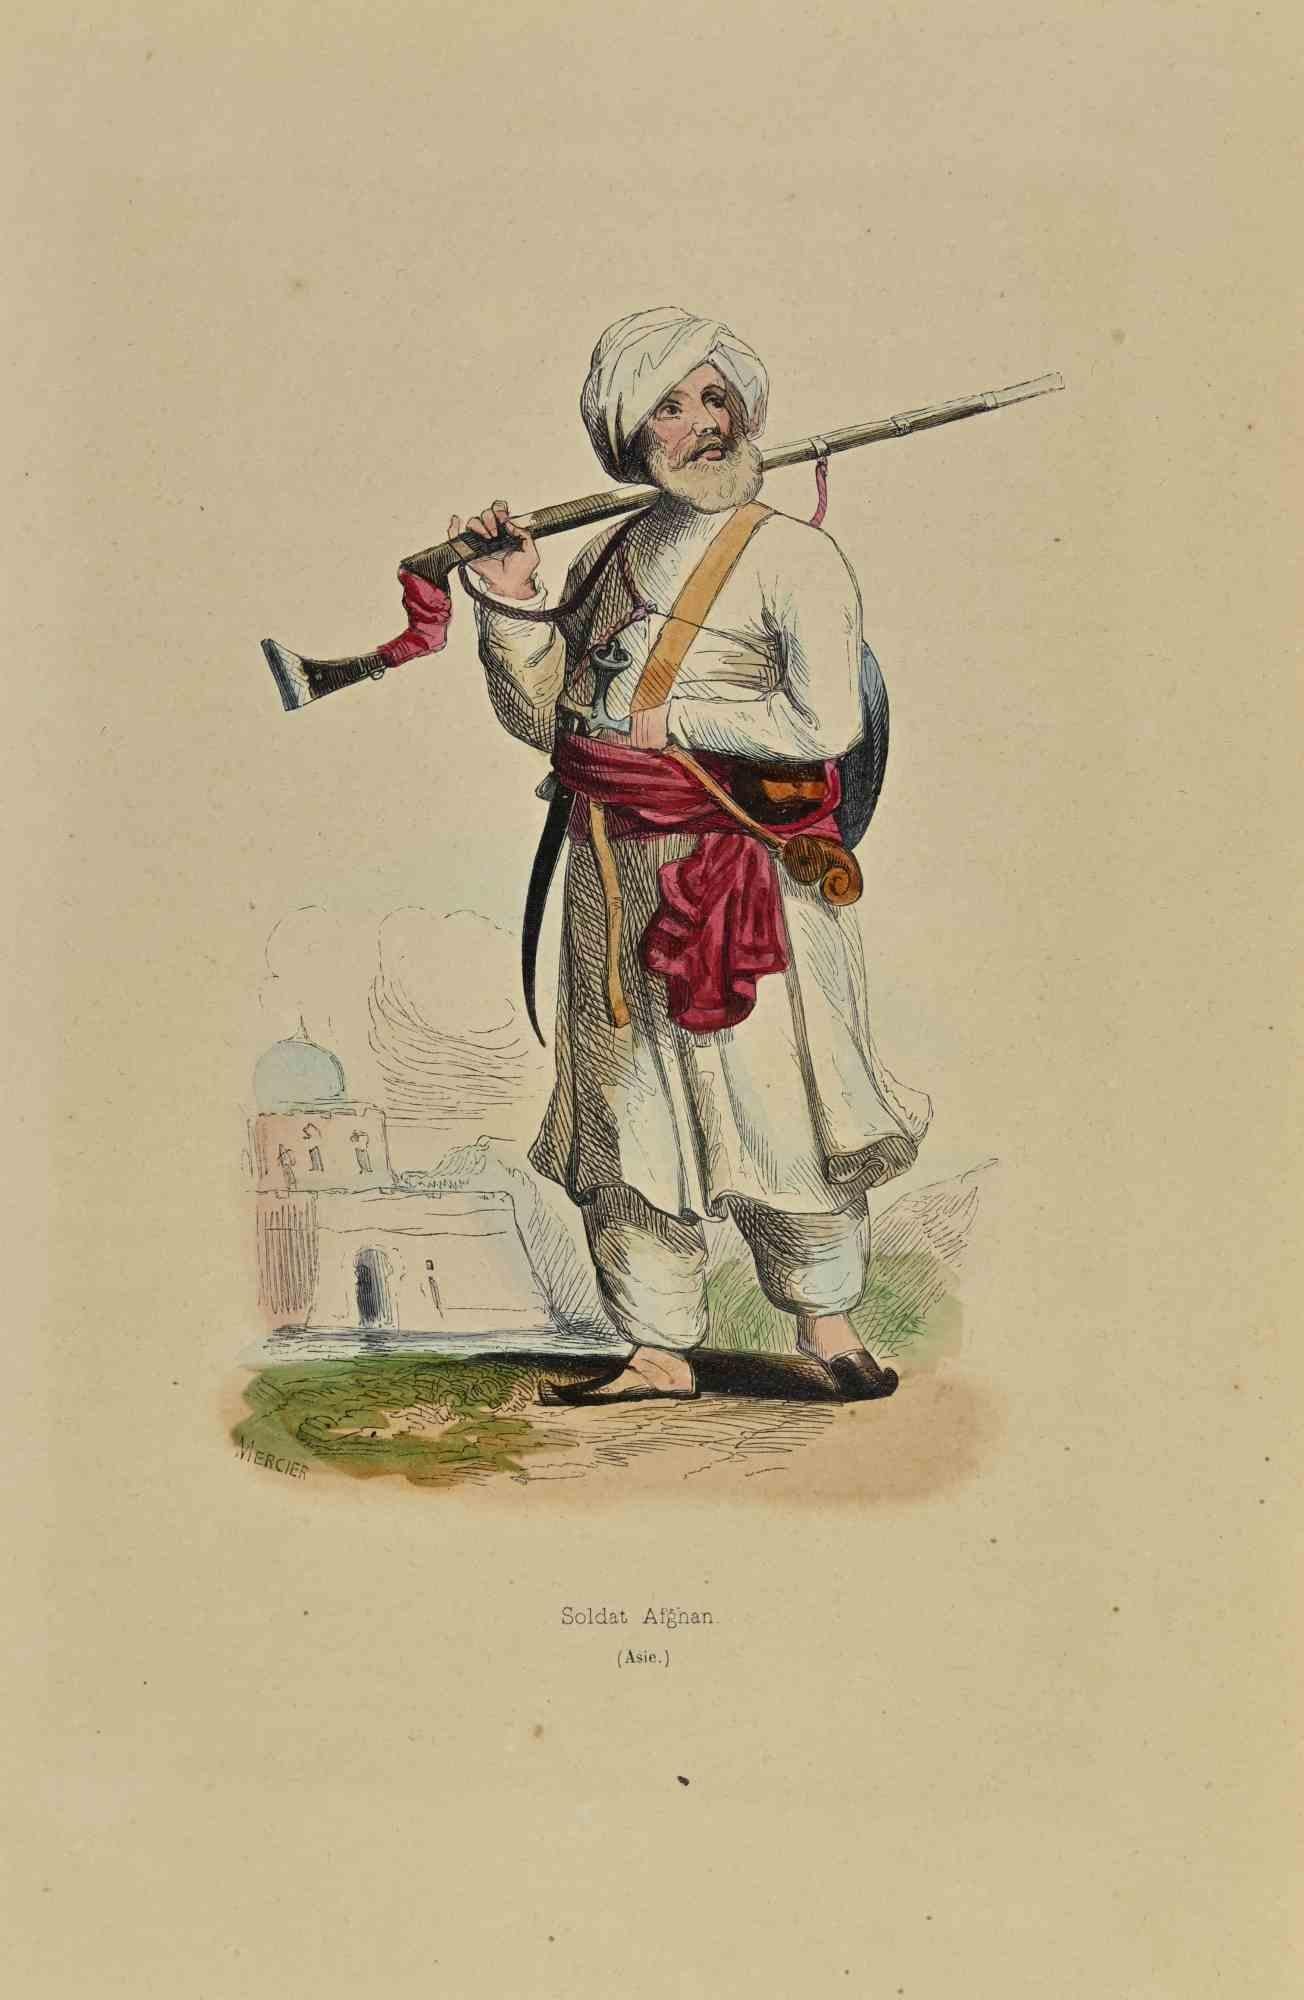 Afghan Soldier is a lithograph made by Auguste Wahlen in 1844.

Hand colored.

Good condition.

At the center of the artwork is the original title "Soldat Afghan".

The work is part of Suite Moeurs, usages et costumes de tous les peuples du monde,